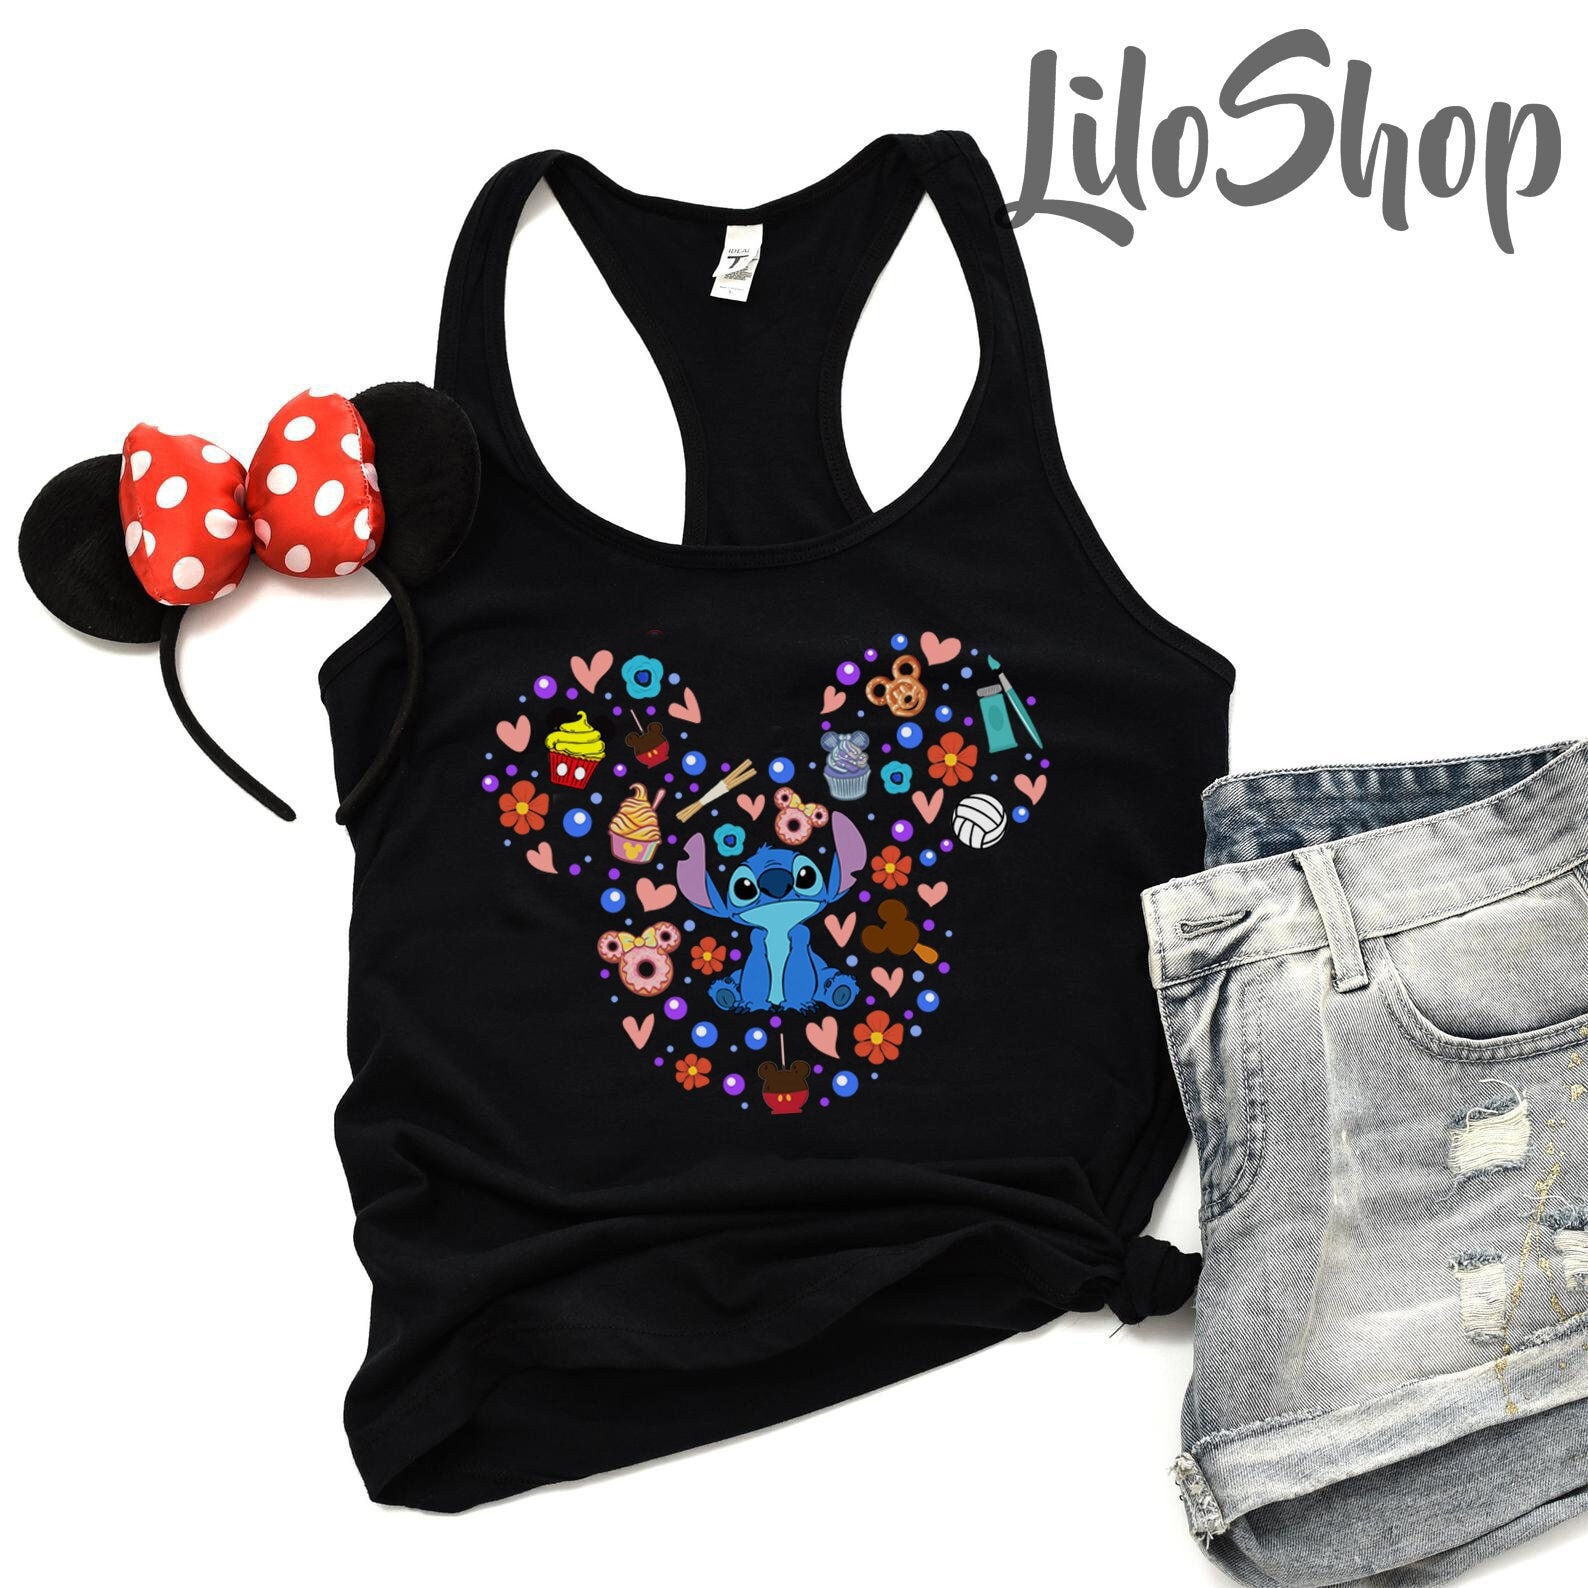 Women's Lilo & Stitch Red and Blue Gamer Racerback Tank Top – Fifth Sun